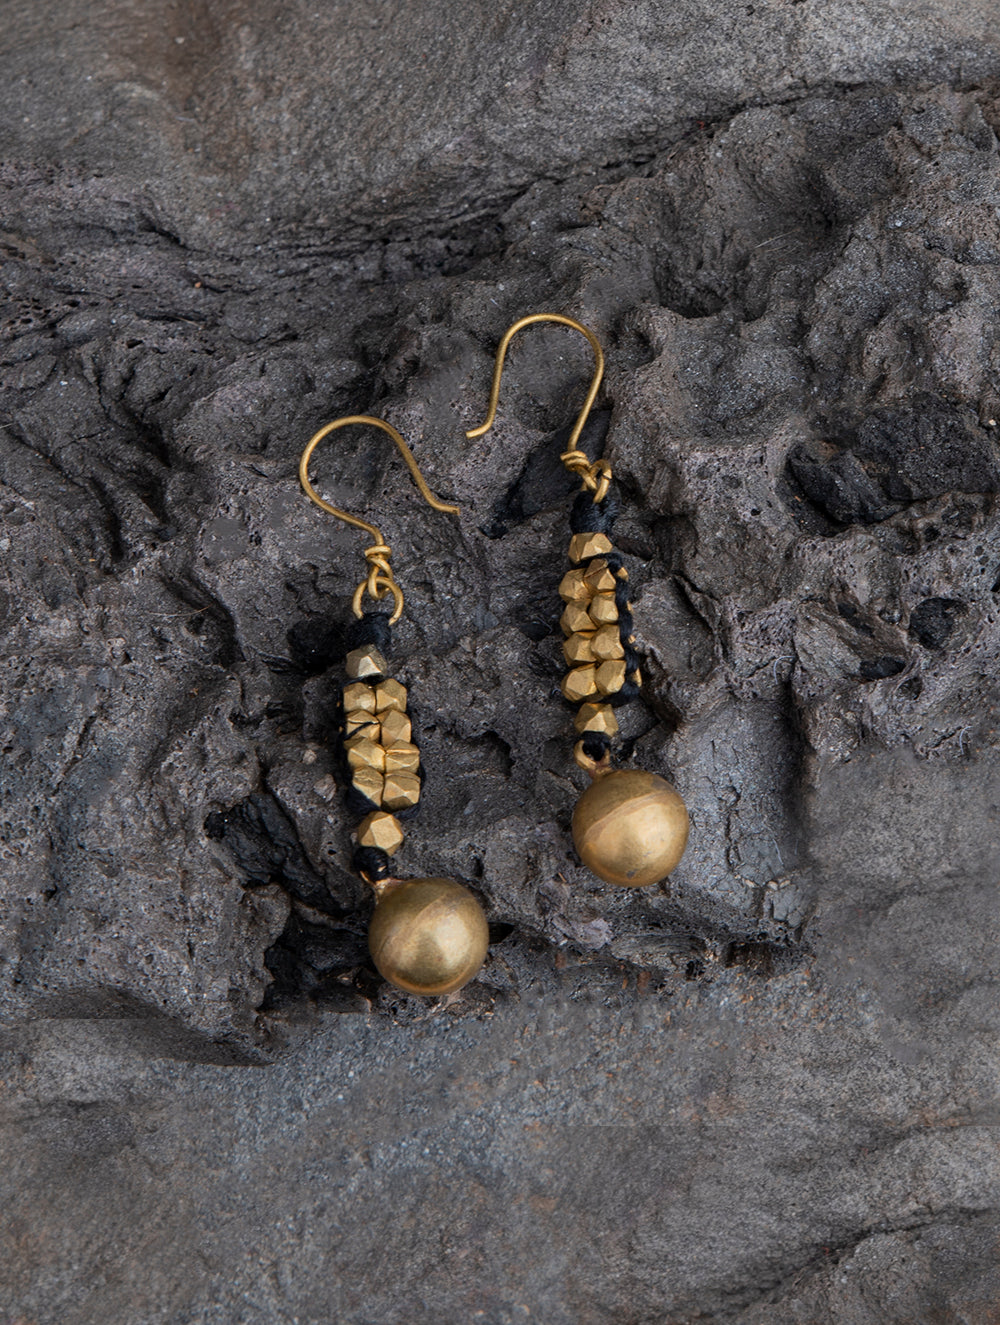 Load image into Gallery viewer, Rustic Dhokra Brass Metal Earring